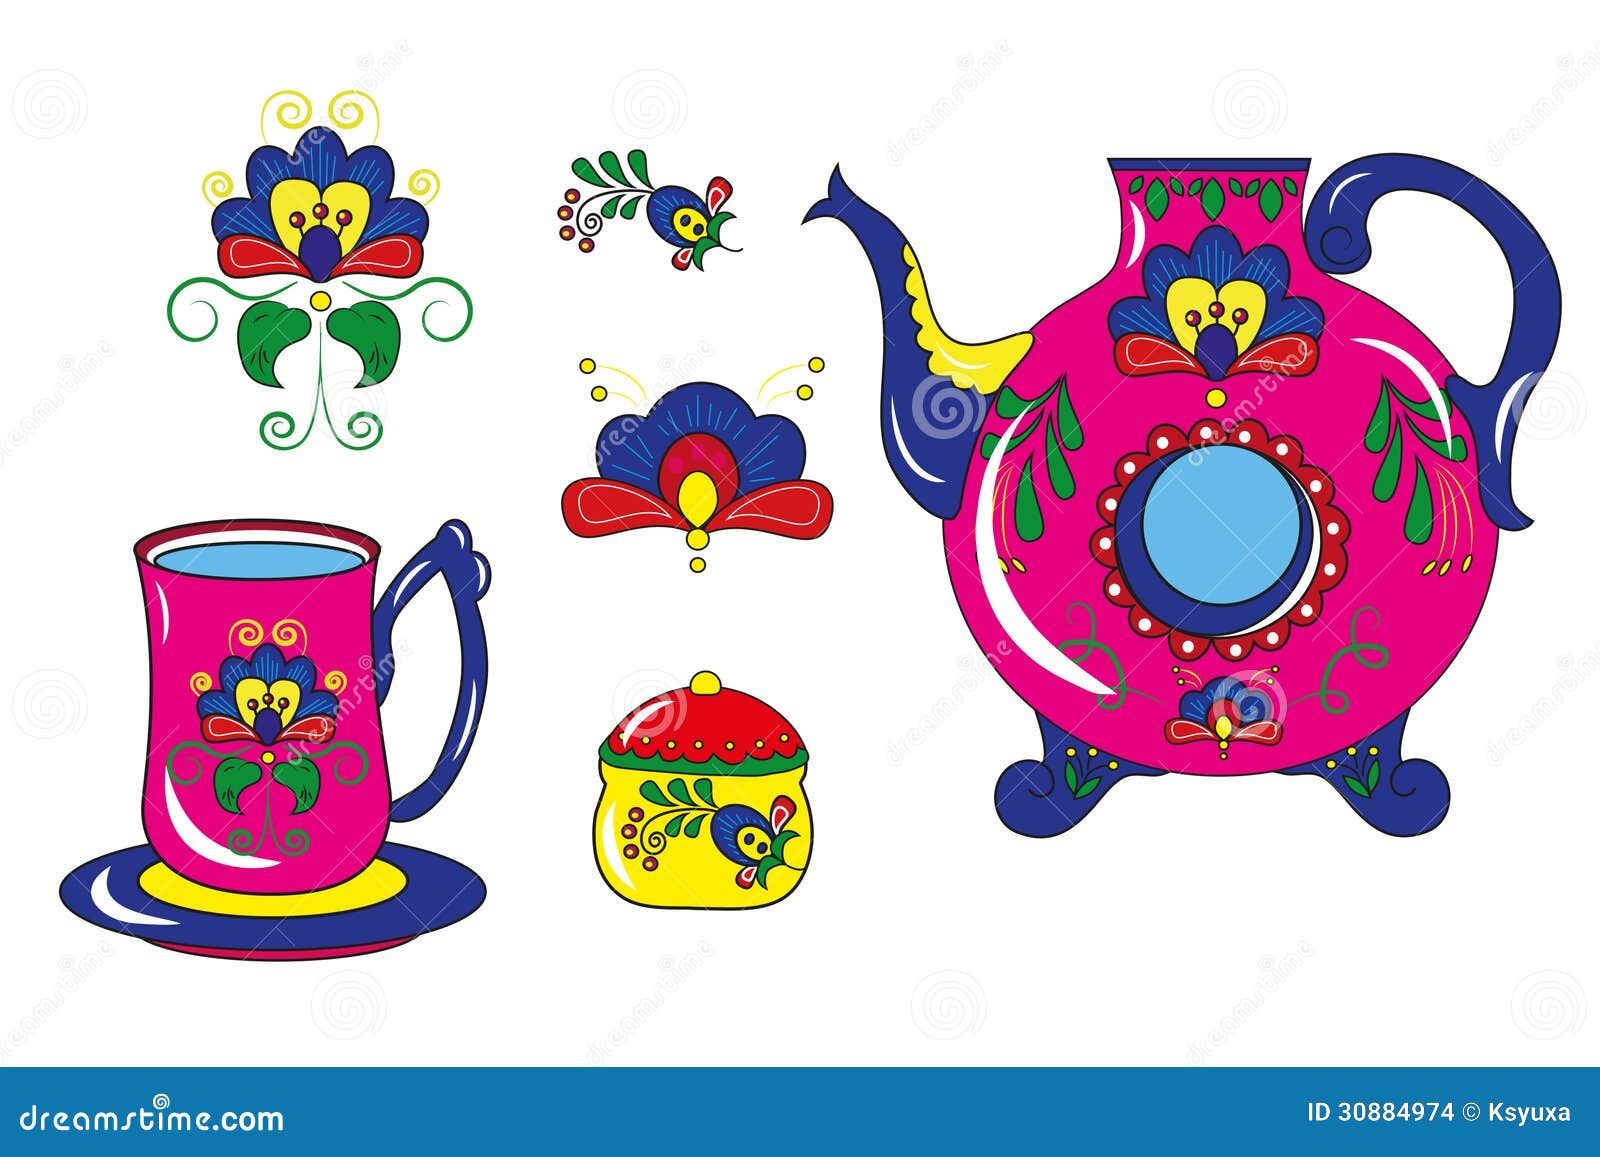 Decorative Patterns on the Dishes Stock Vector - Illustration of bowl ...